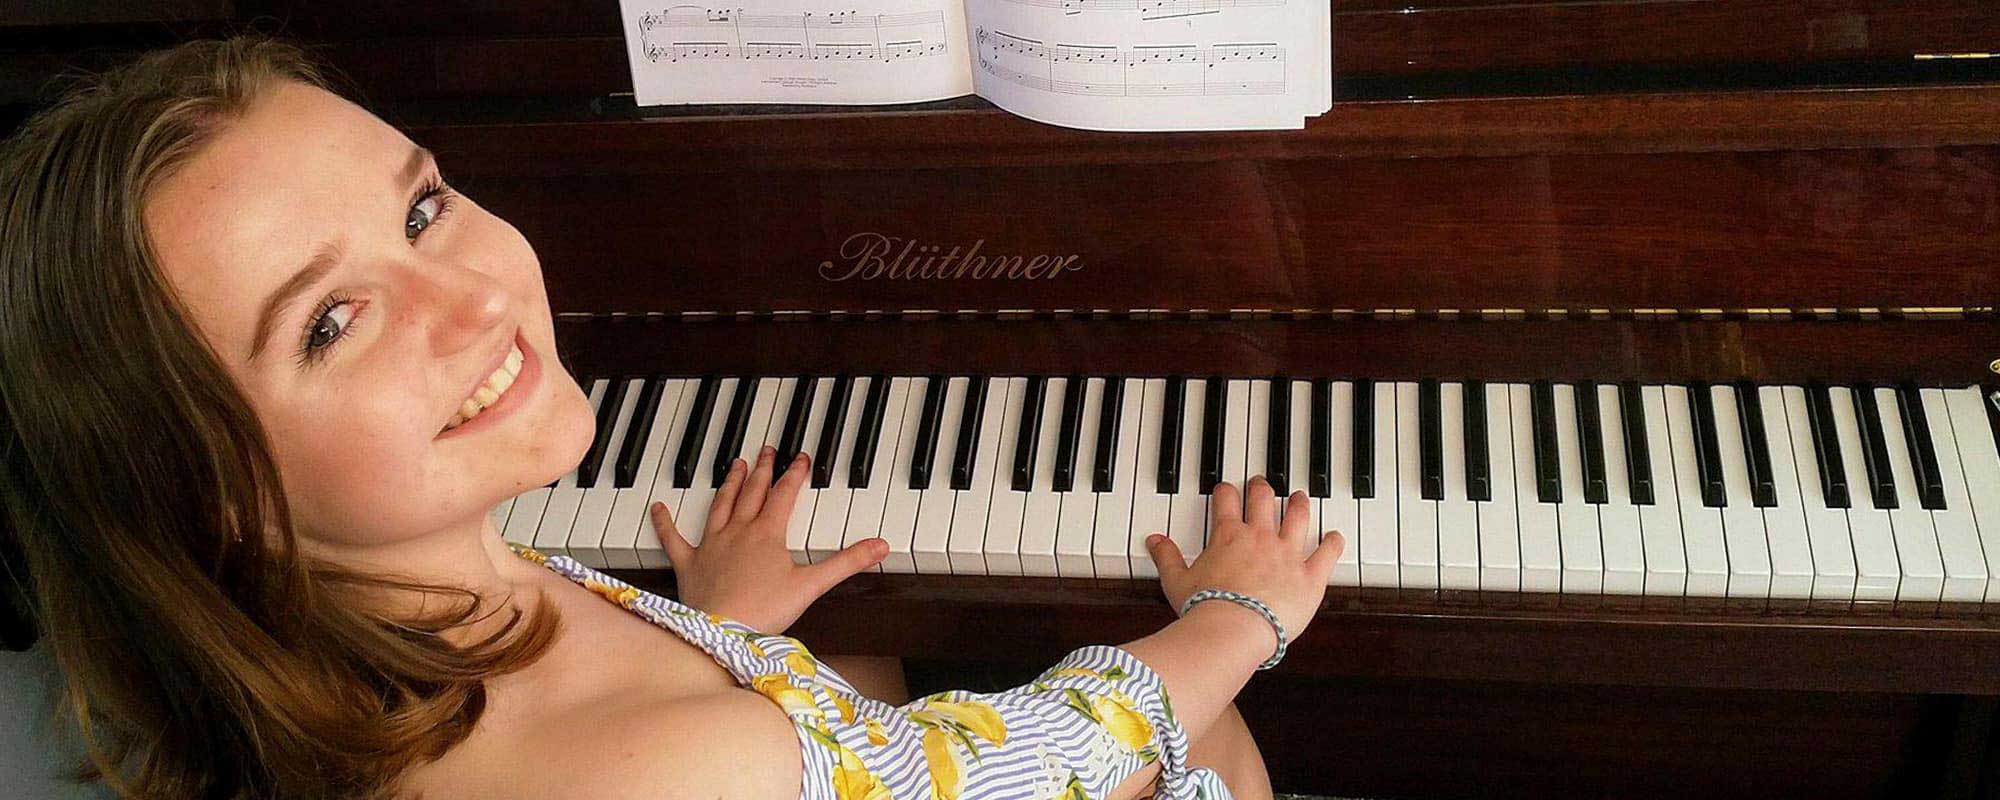 Piano and keyboard lessons in cardiff by the professional teacher Kath Thorne-Thomas